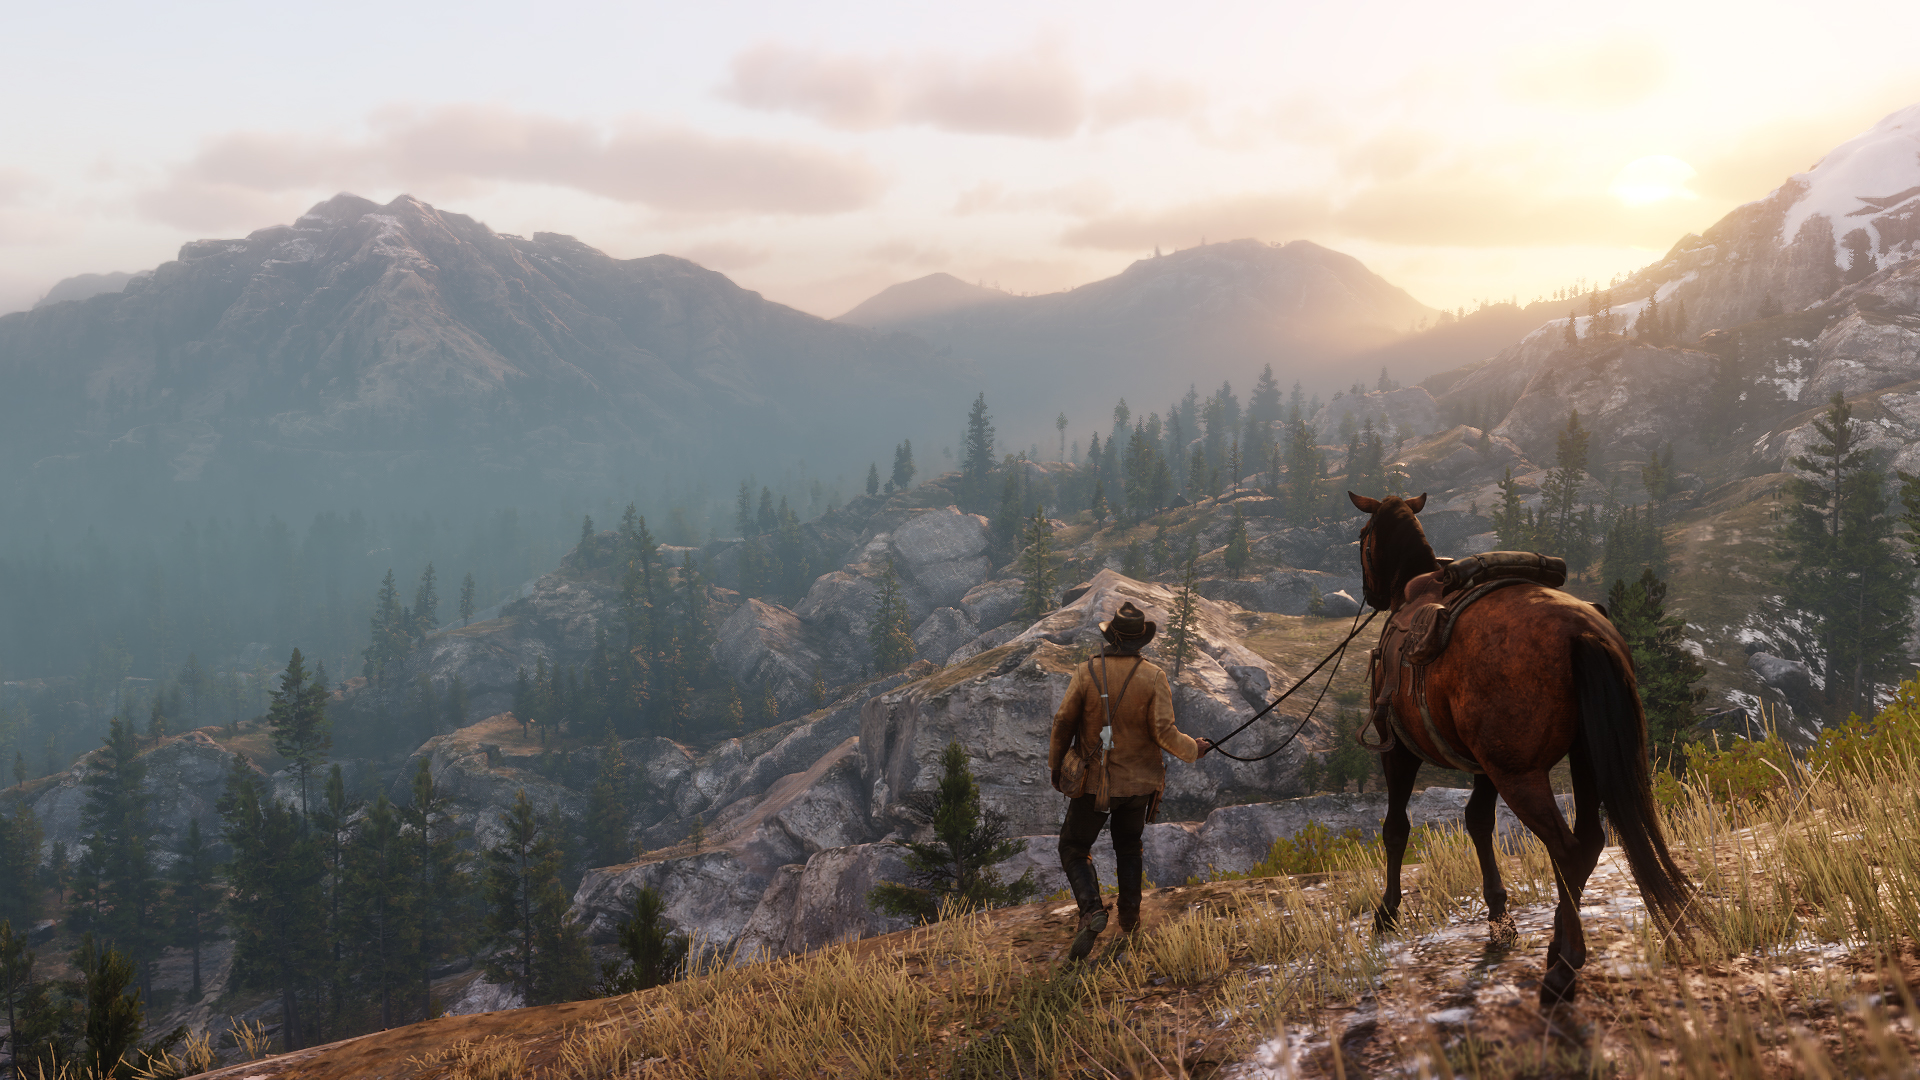 A screenshot from Red Dead Redemption 2